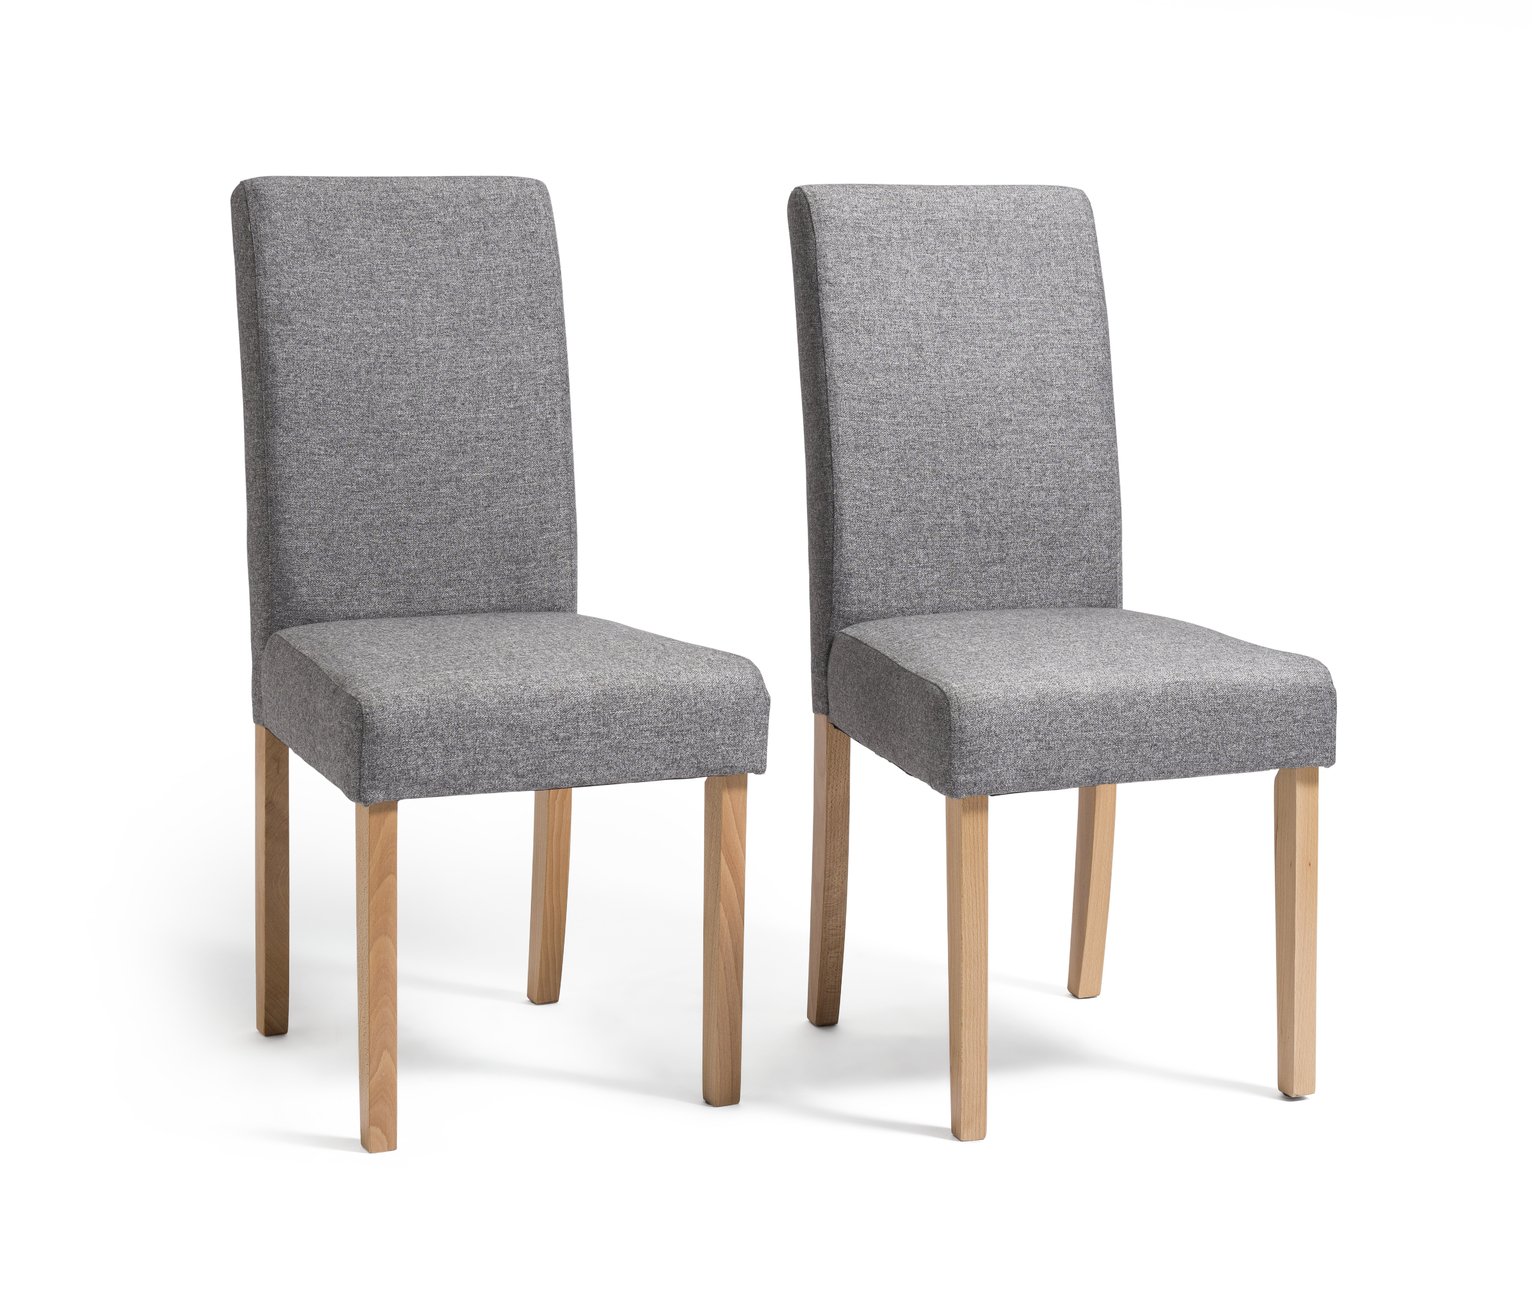 Argos Home Pair of Tweed Mid Back Dining Chairs - Grey